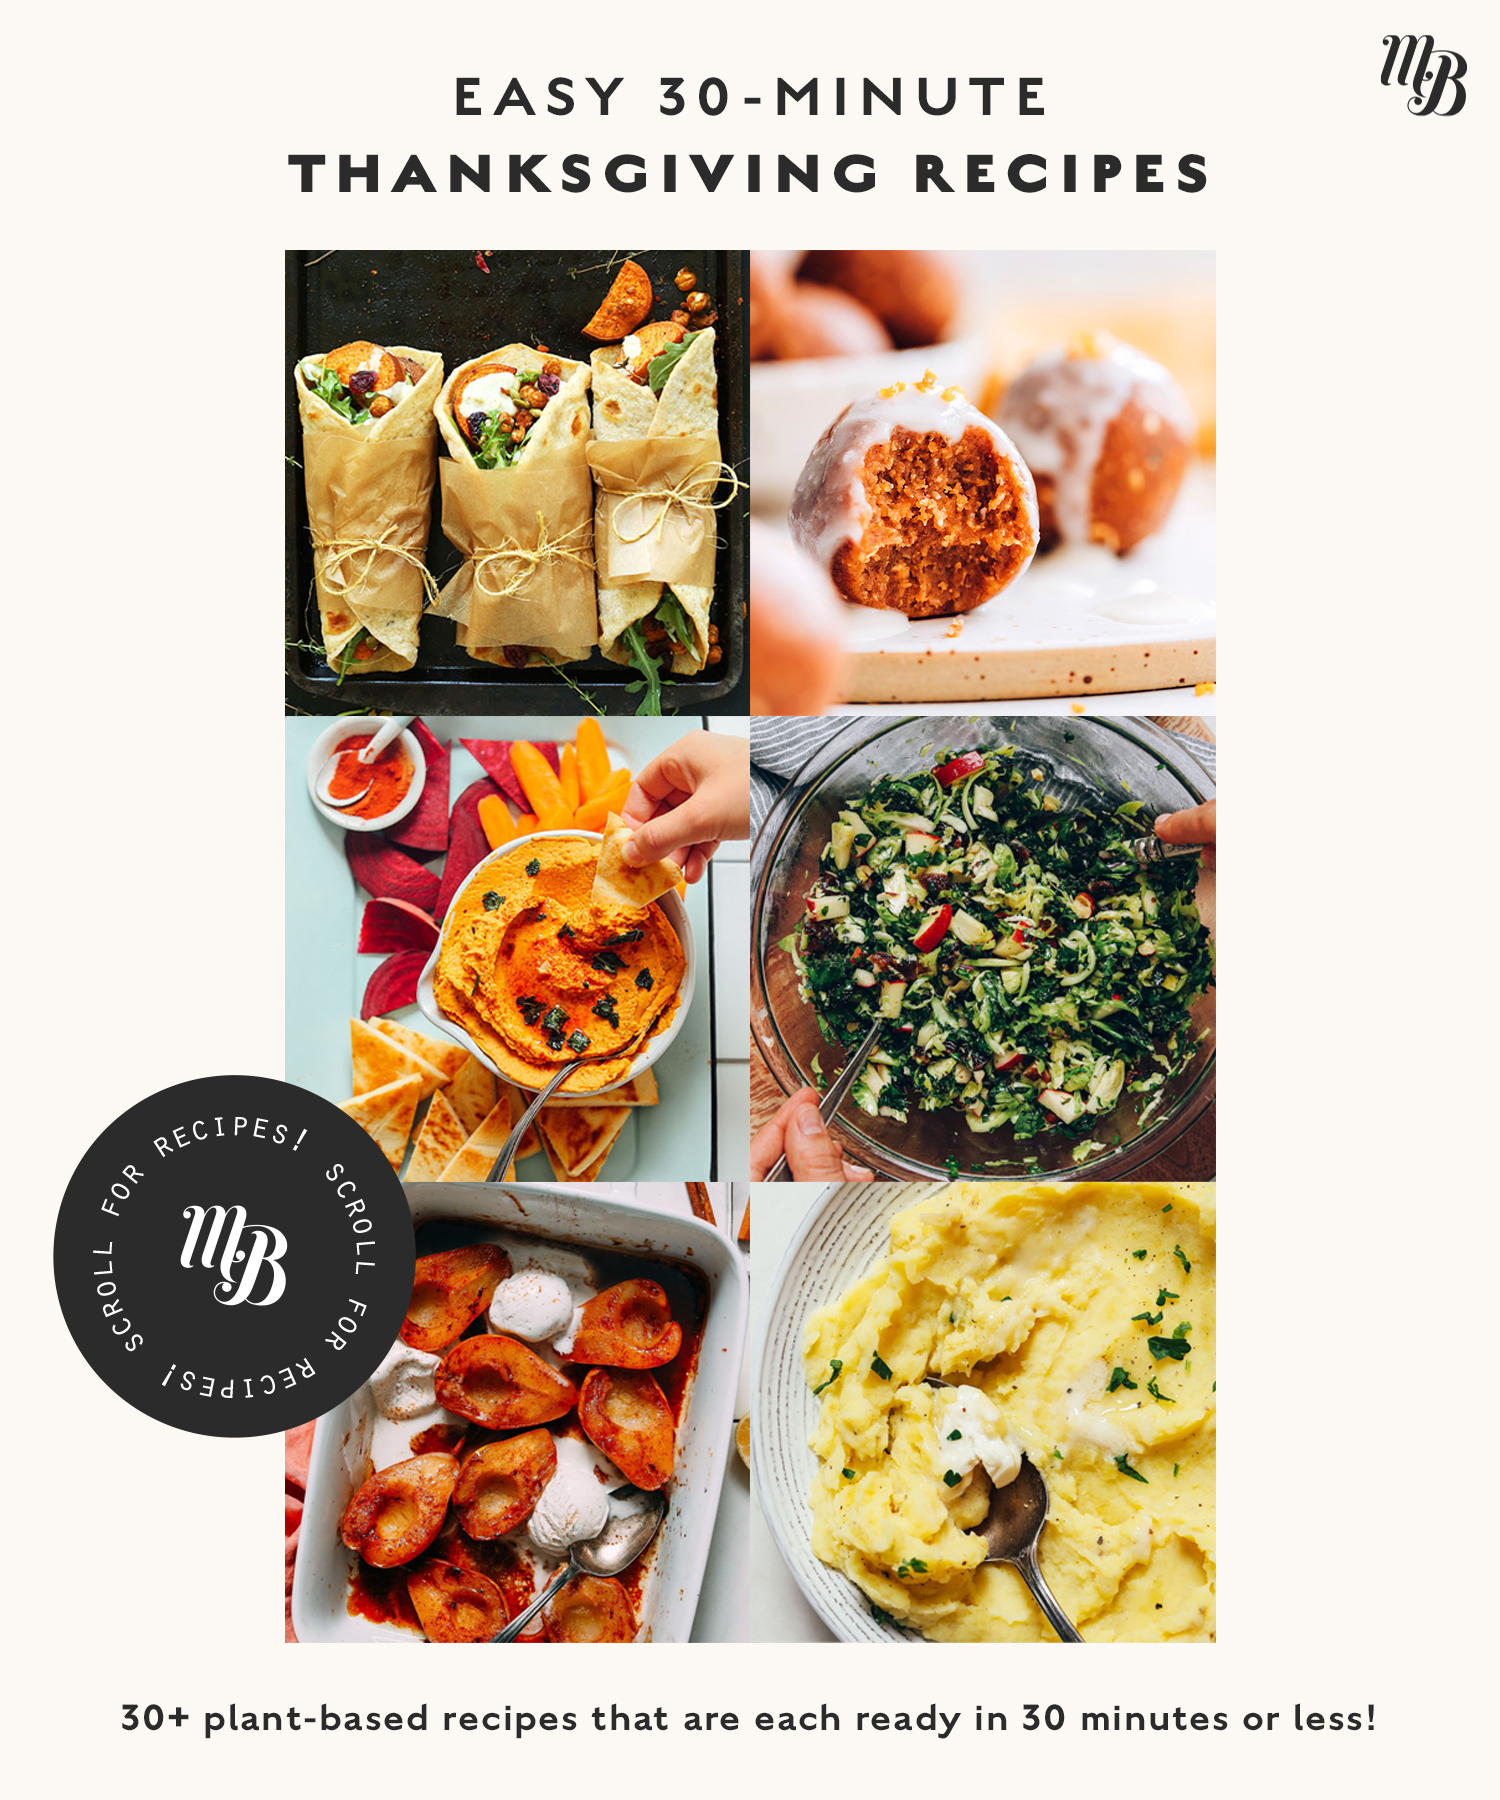 Assortment of easy plant-based Thanksgiving recipes